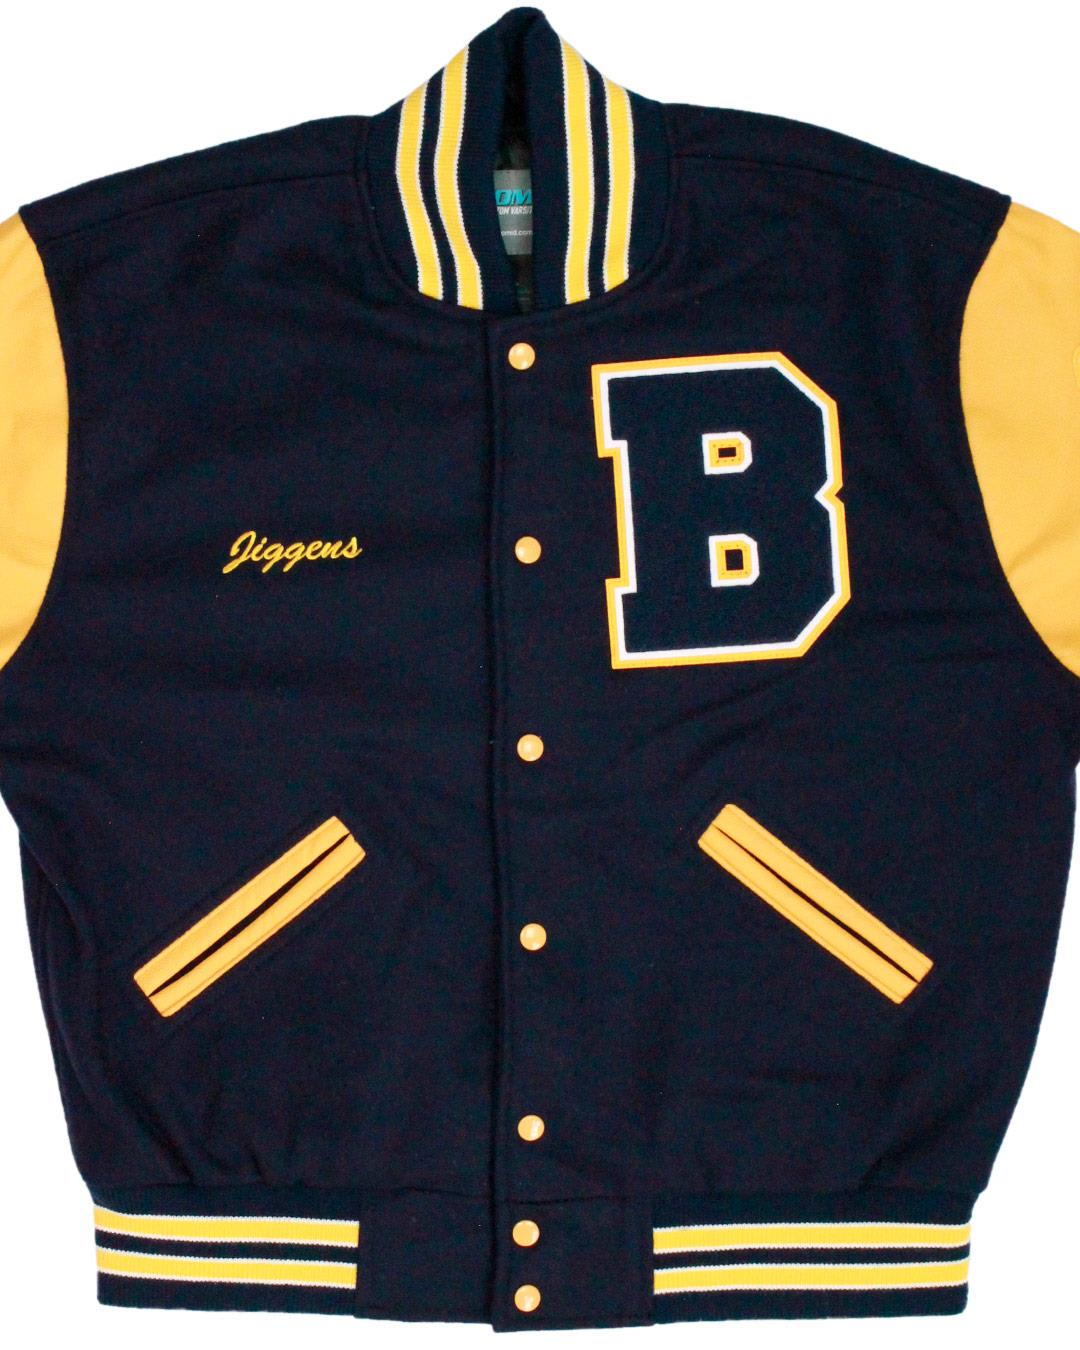 Bethesda-Chevy Chase High School Barons Letterman Jacket, Bethesda, MD - Front